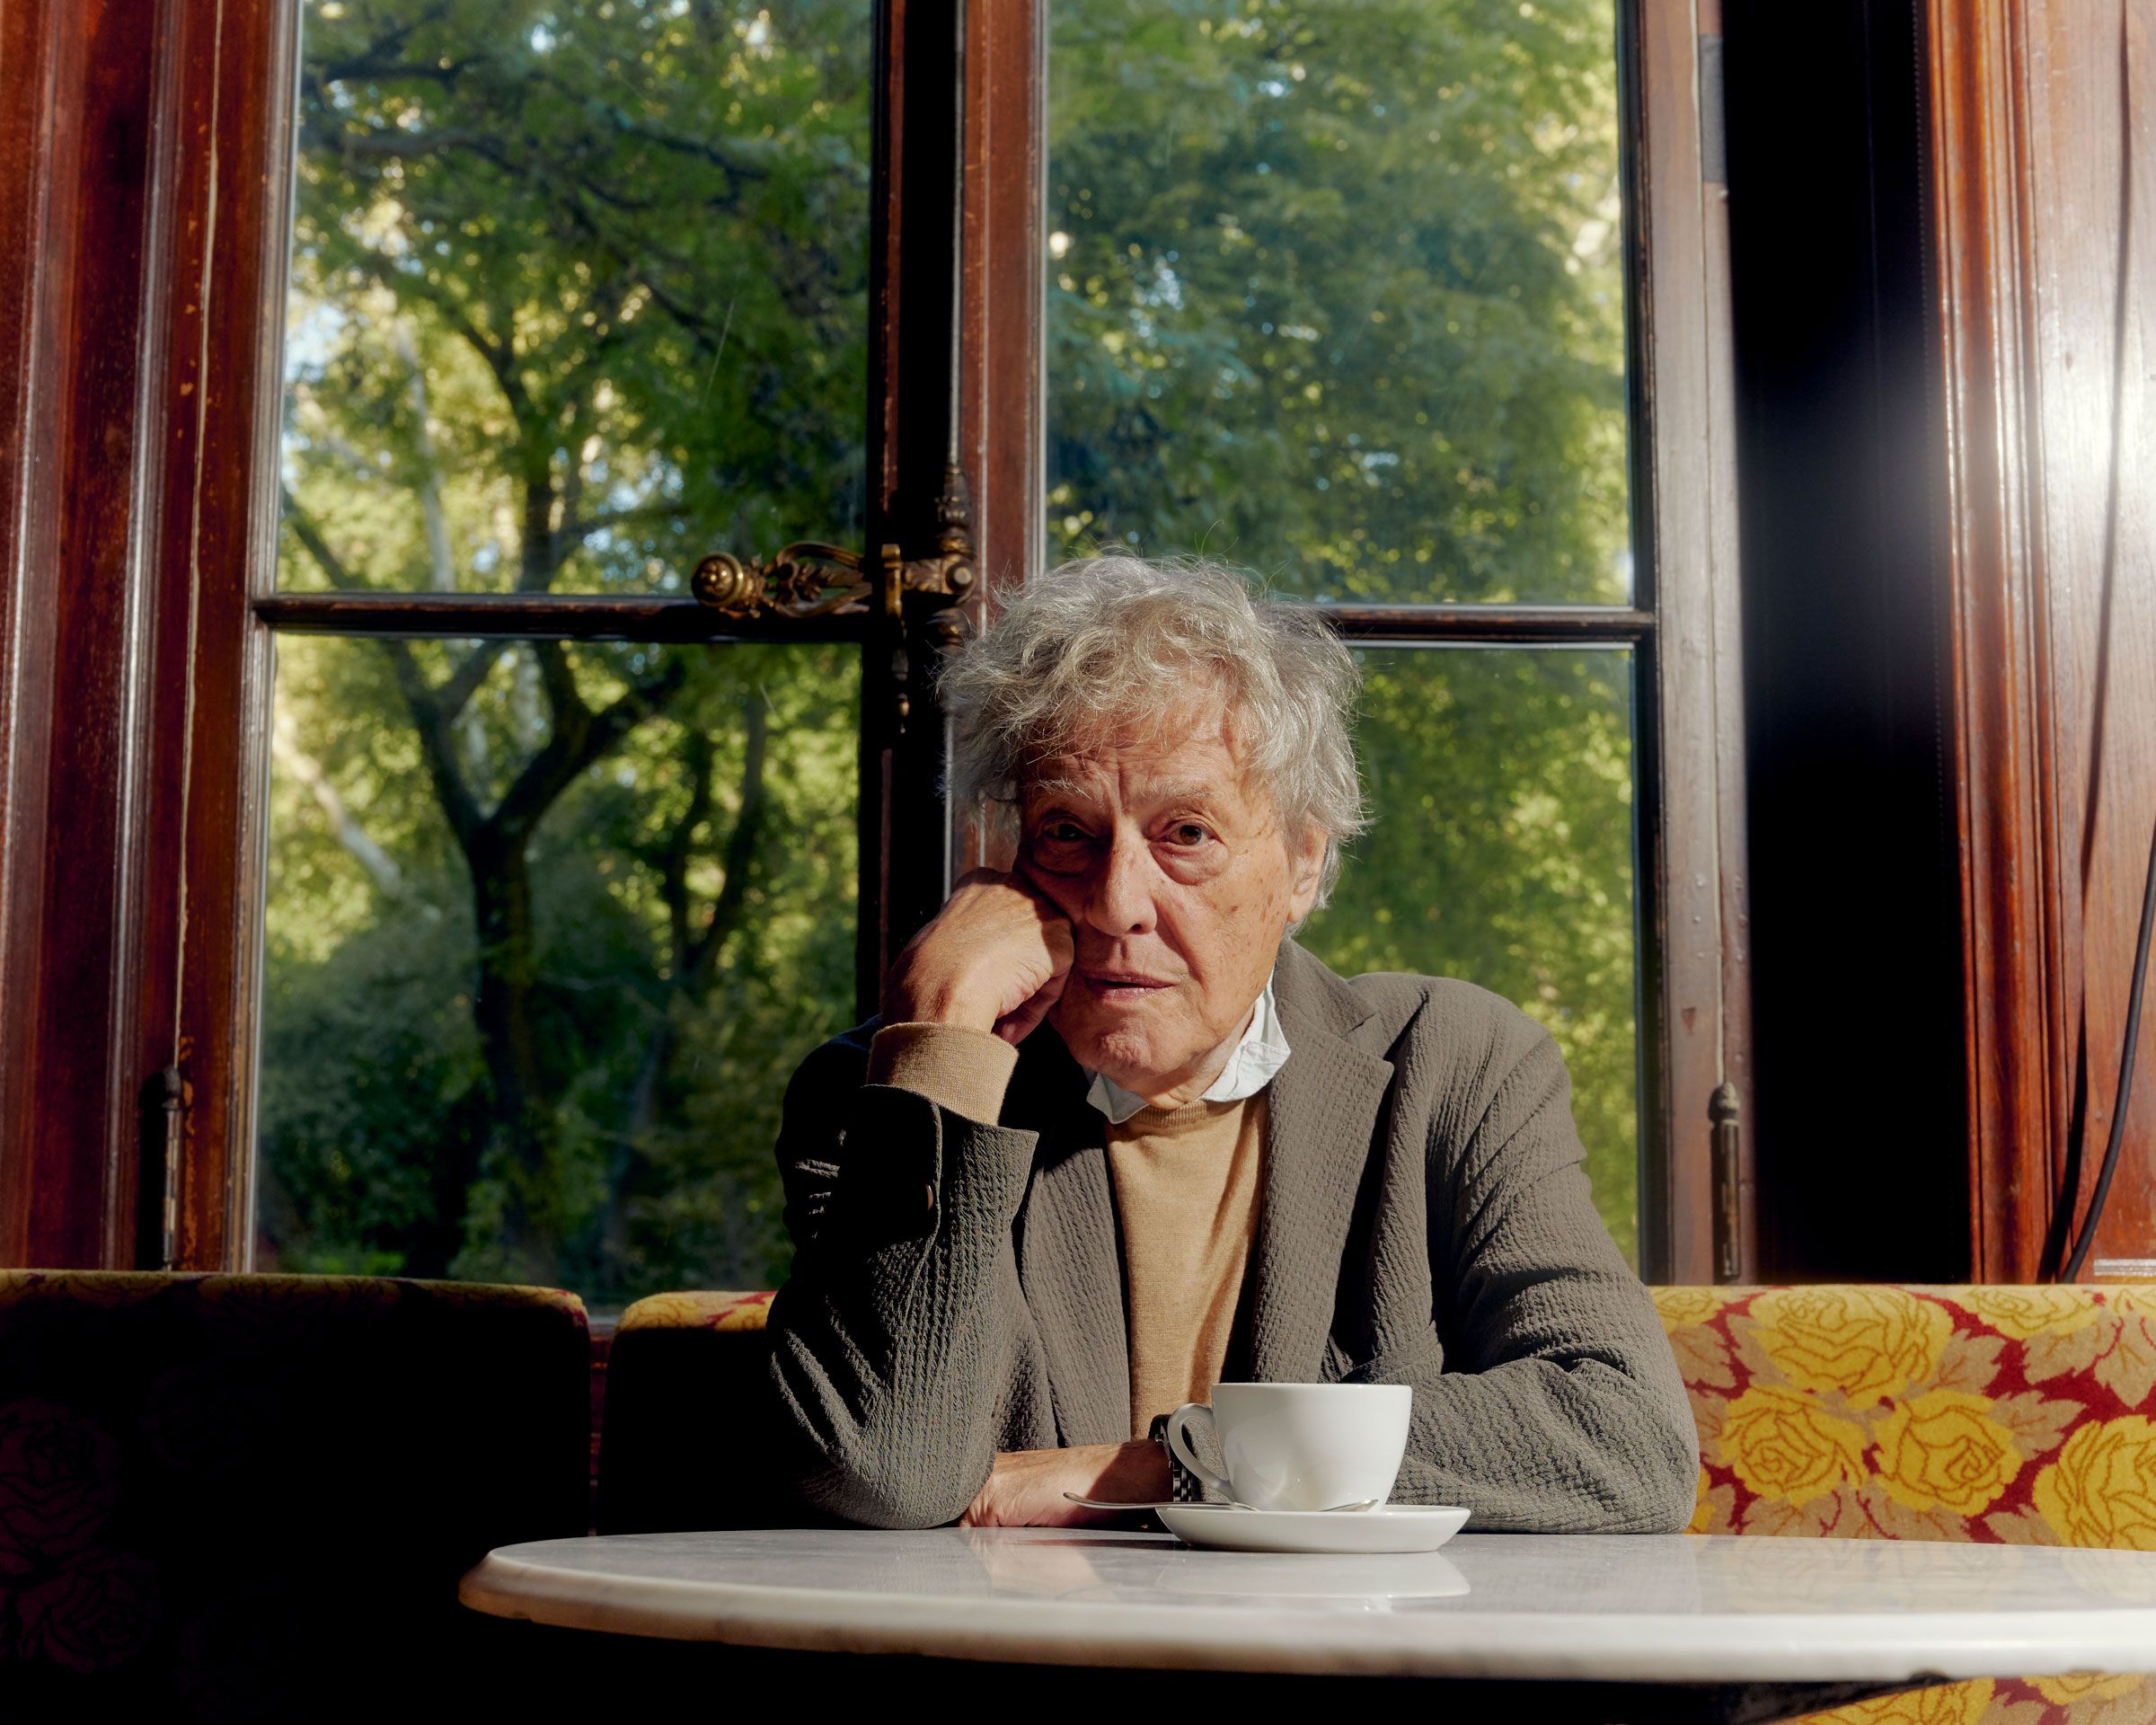 Playwright Tom Stoppard photographed at Cafe Sabarsky in the Neue Galerie on Sept. 15, 2022. (Evelyn Freja for TIME)